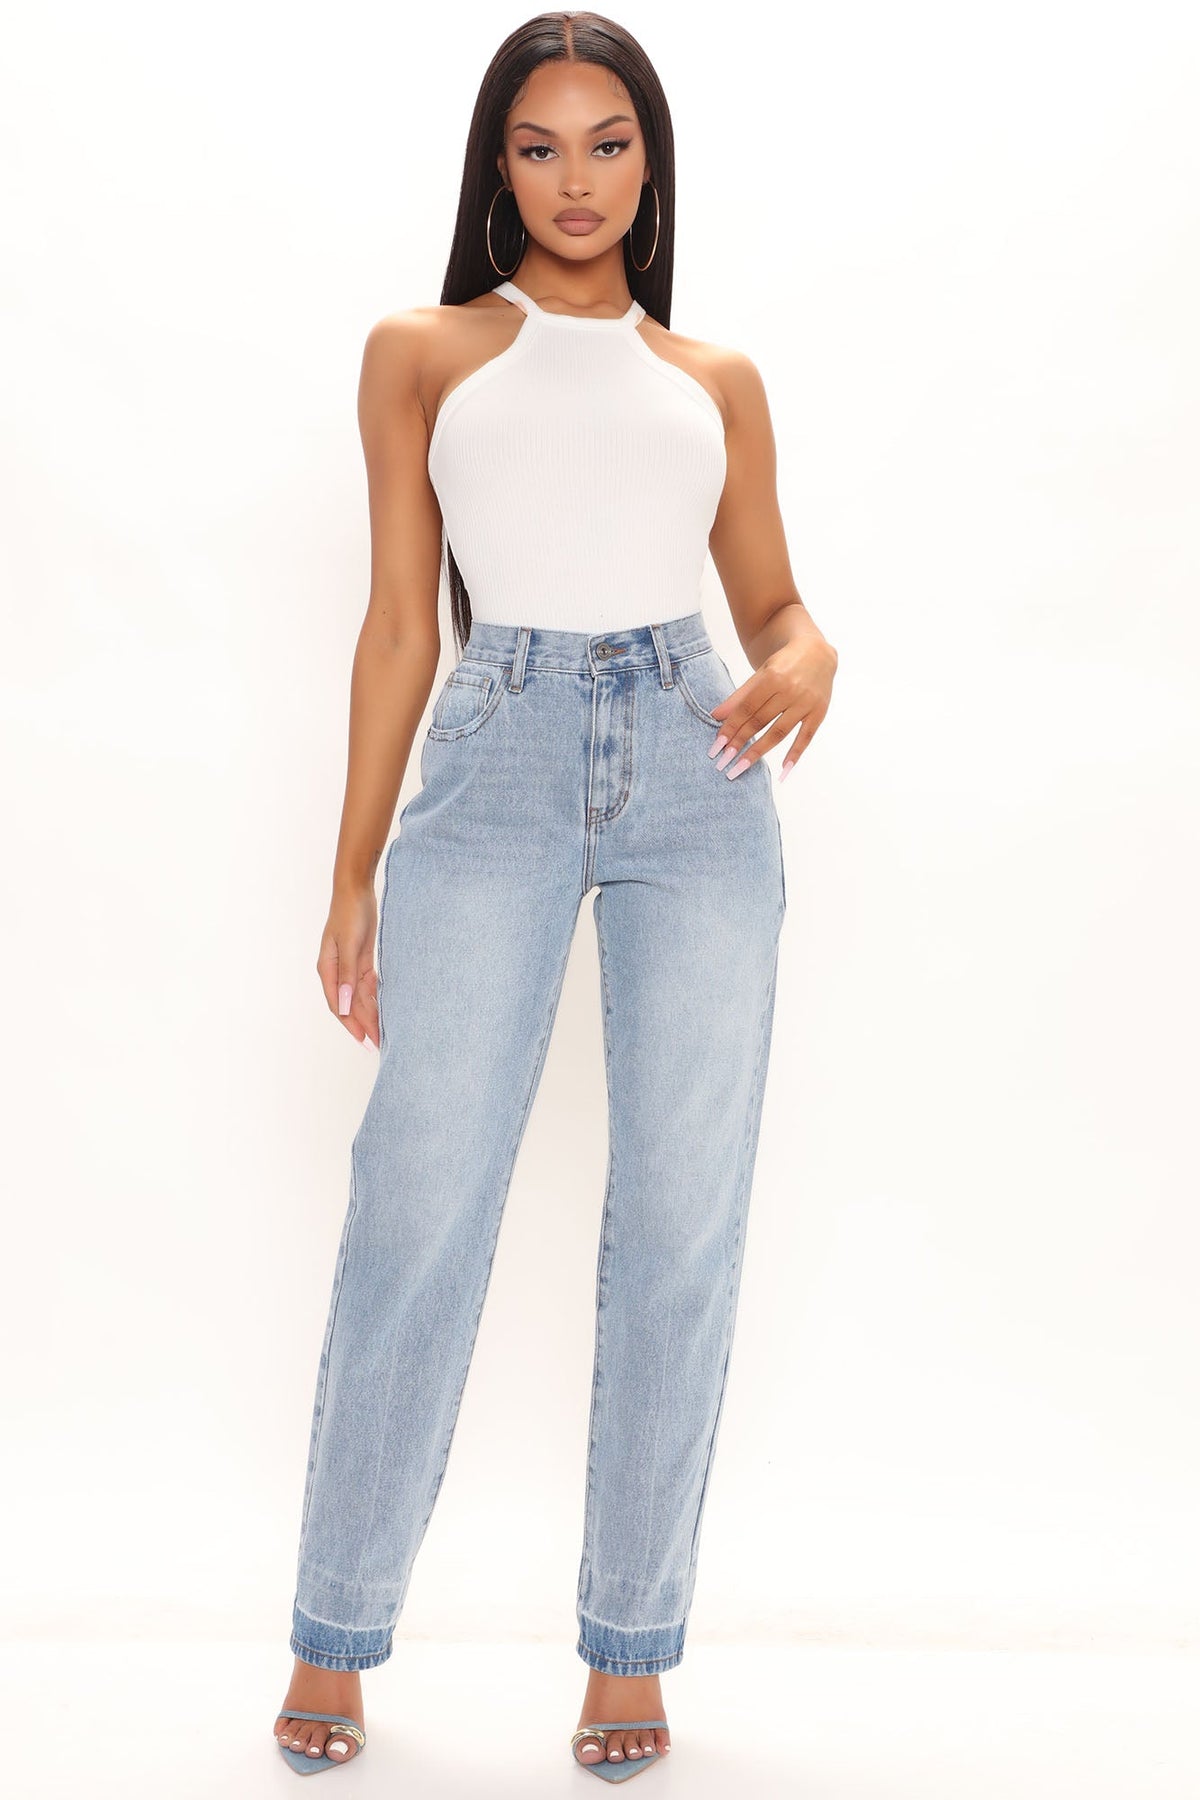 Like What You See Straight Leg Jeans - Light Blue Wash